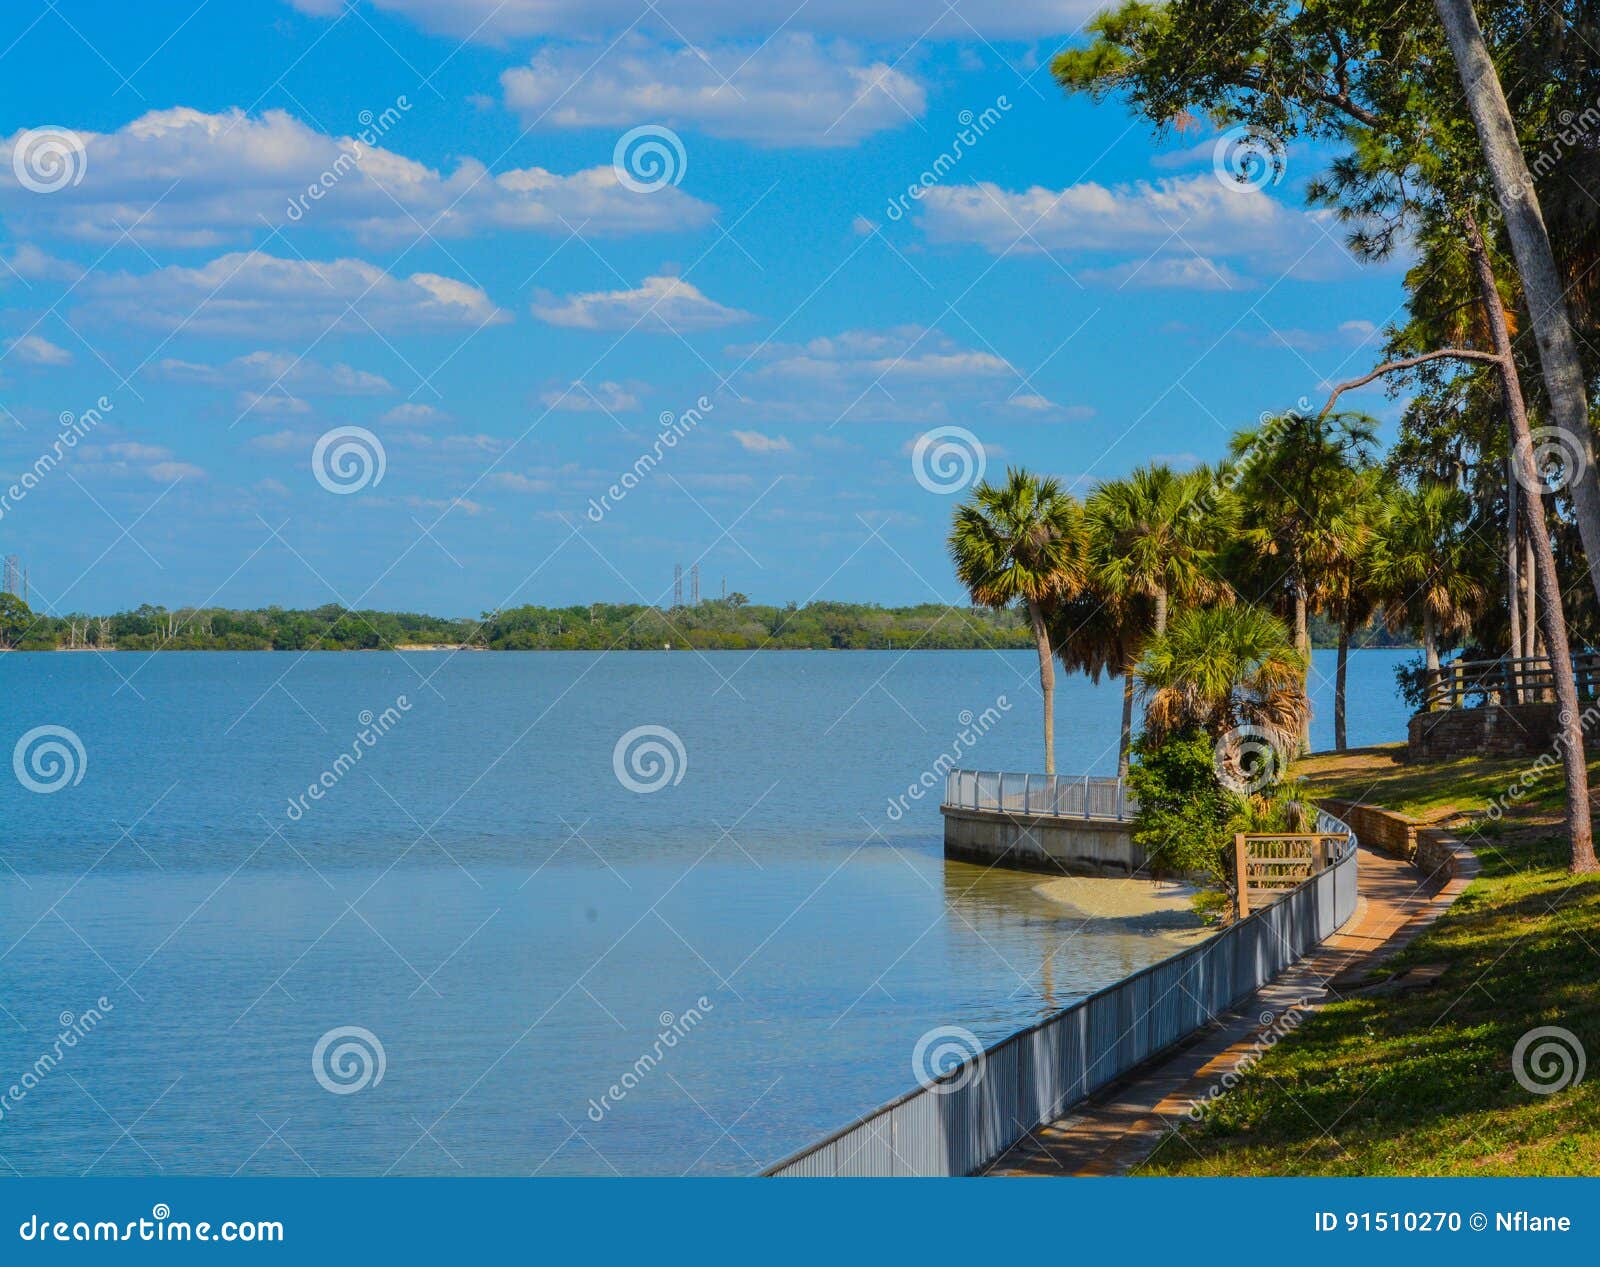 the walkway along tampa bay at philippe park in safety harbor, florida.